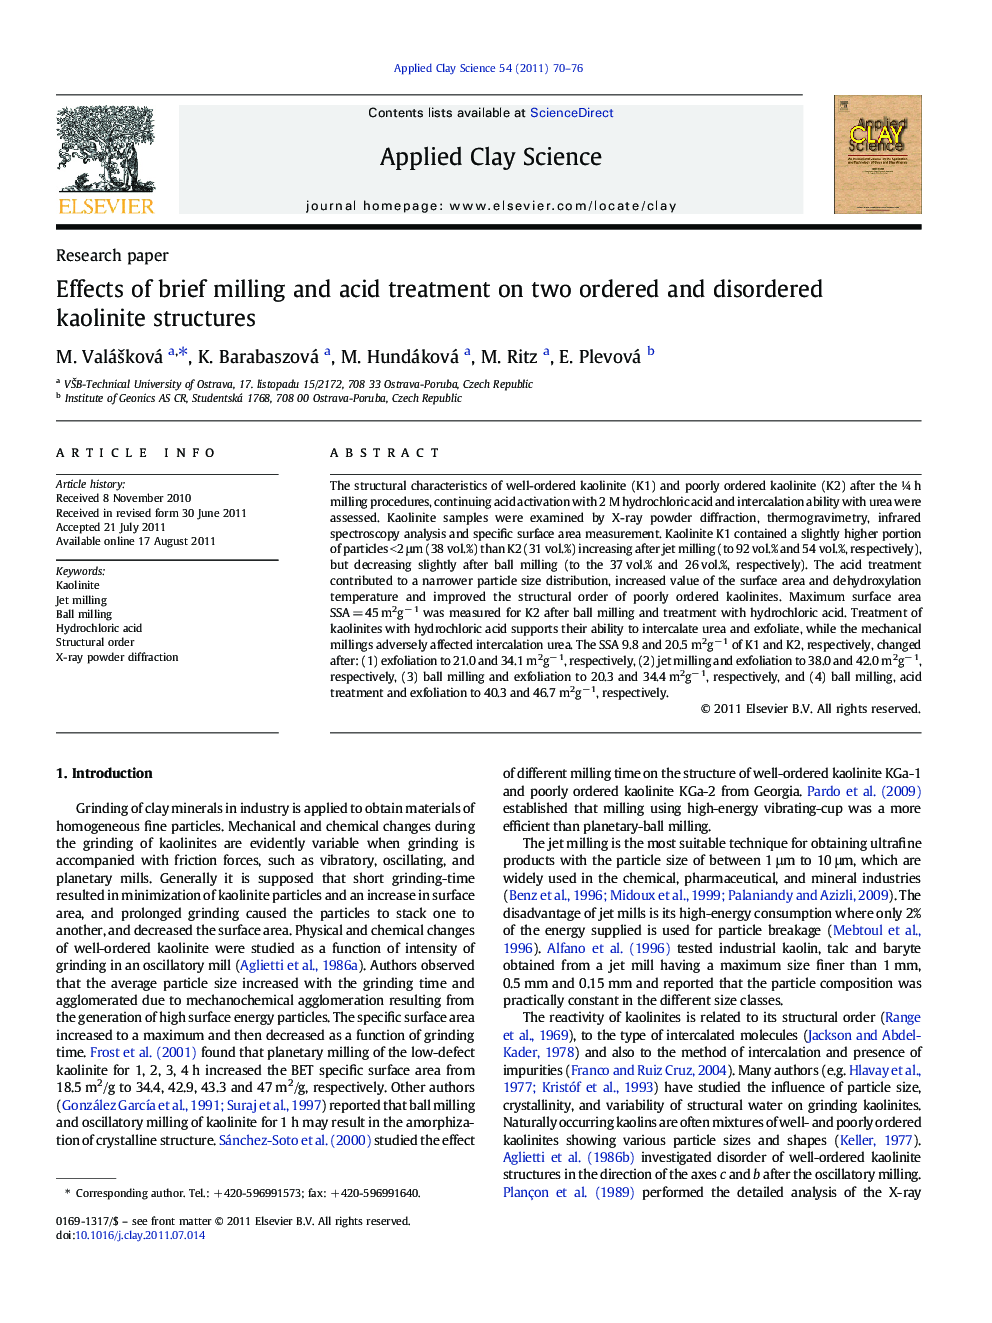 Effects of brief milling and acid treatment on two ordered and disordered kaolinite structures